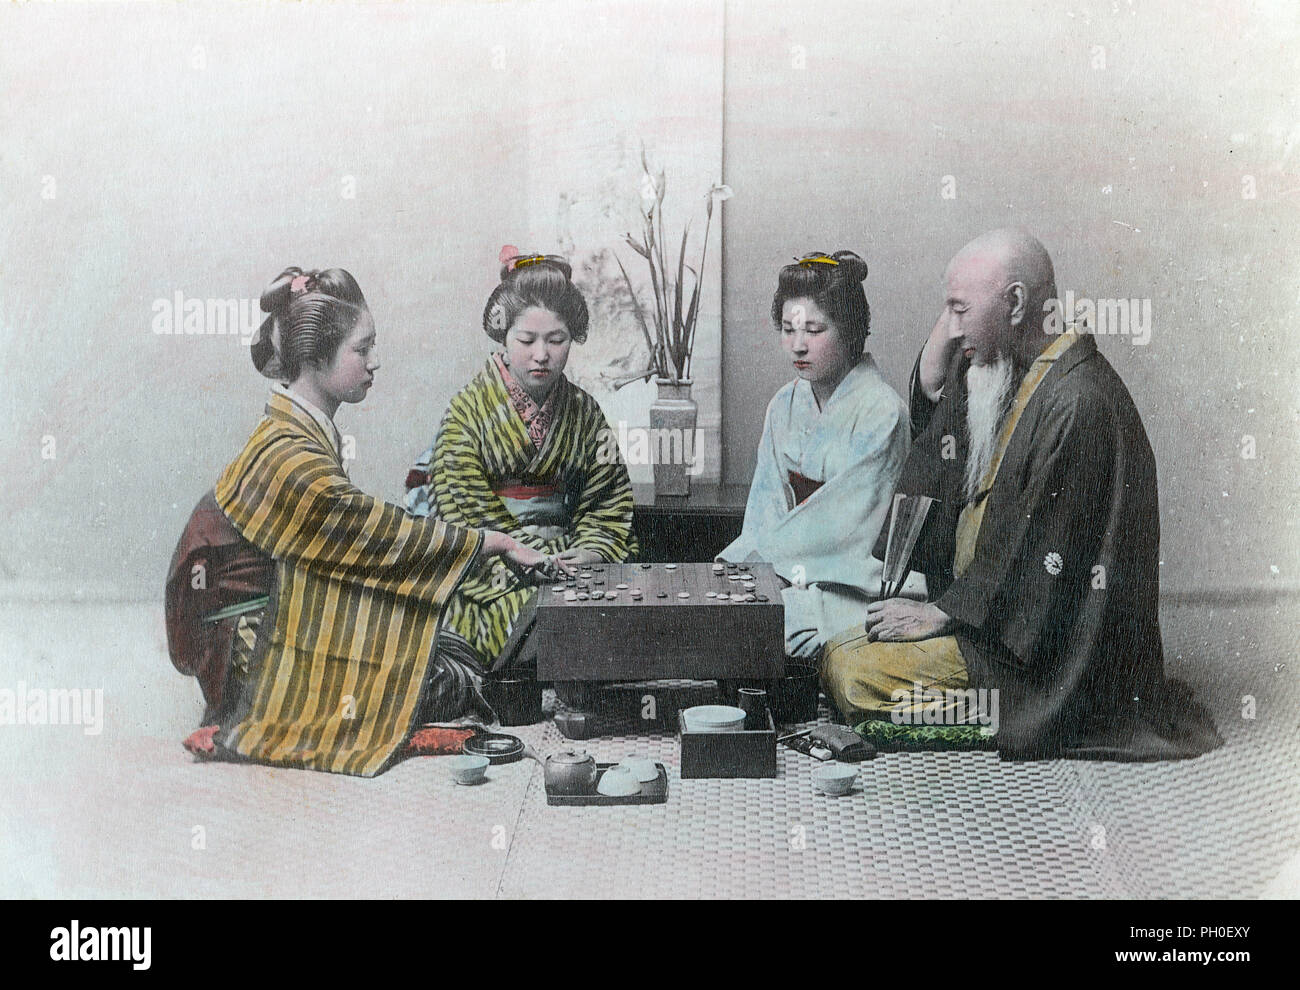 [ 1890s Japan - Playing Go ] —   Three young women in kimono and traditional hairstyles and an elderly man in a haori coat are seated around a board for the game of go.  This studio is arranged as a zashiki (guest room), with an ikebana flower arrangement and scroll in the back. A small tray with a teapot and two cups can be seen at the front.  19th century vintage albumen photograph. Stock Photo